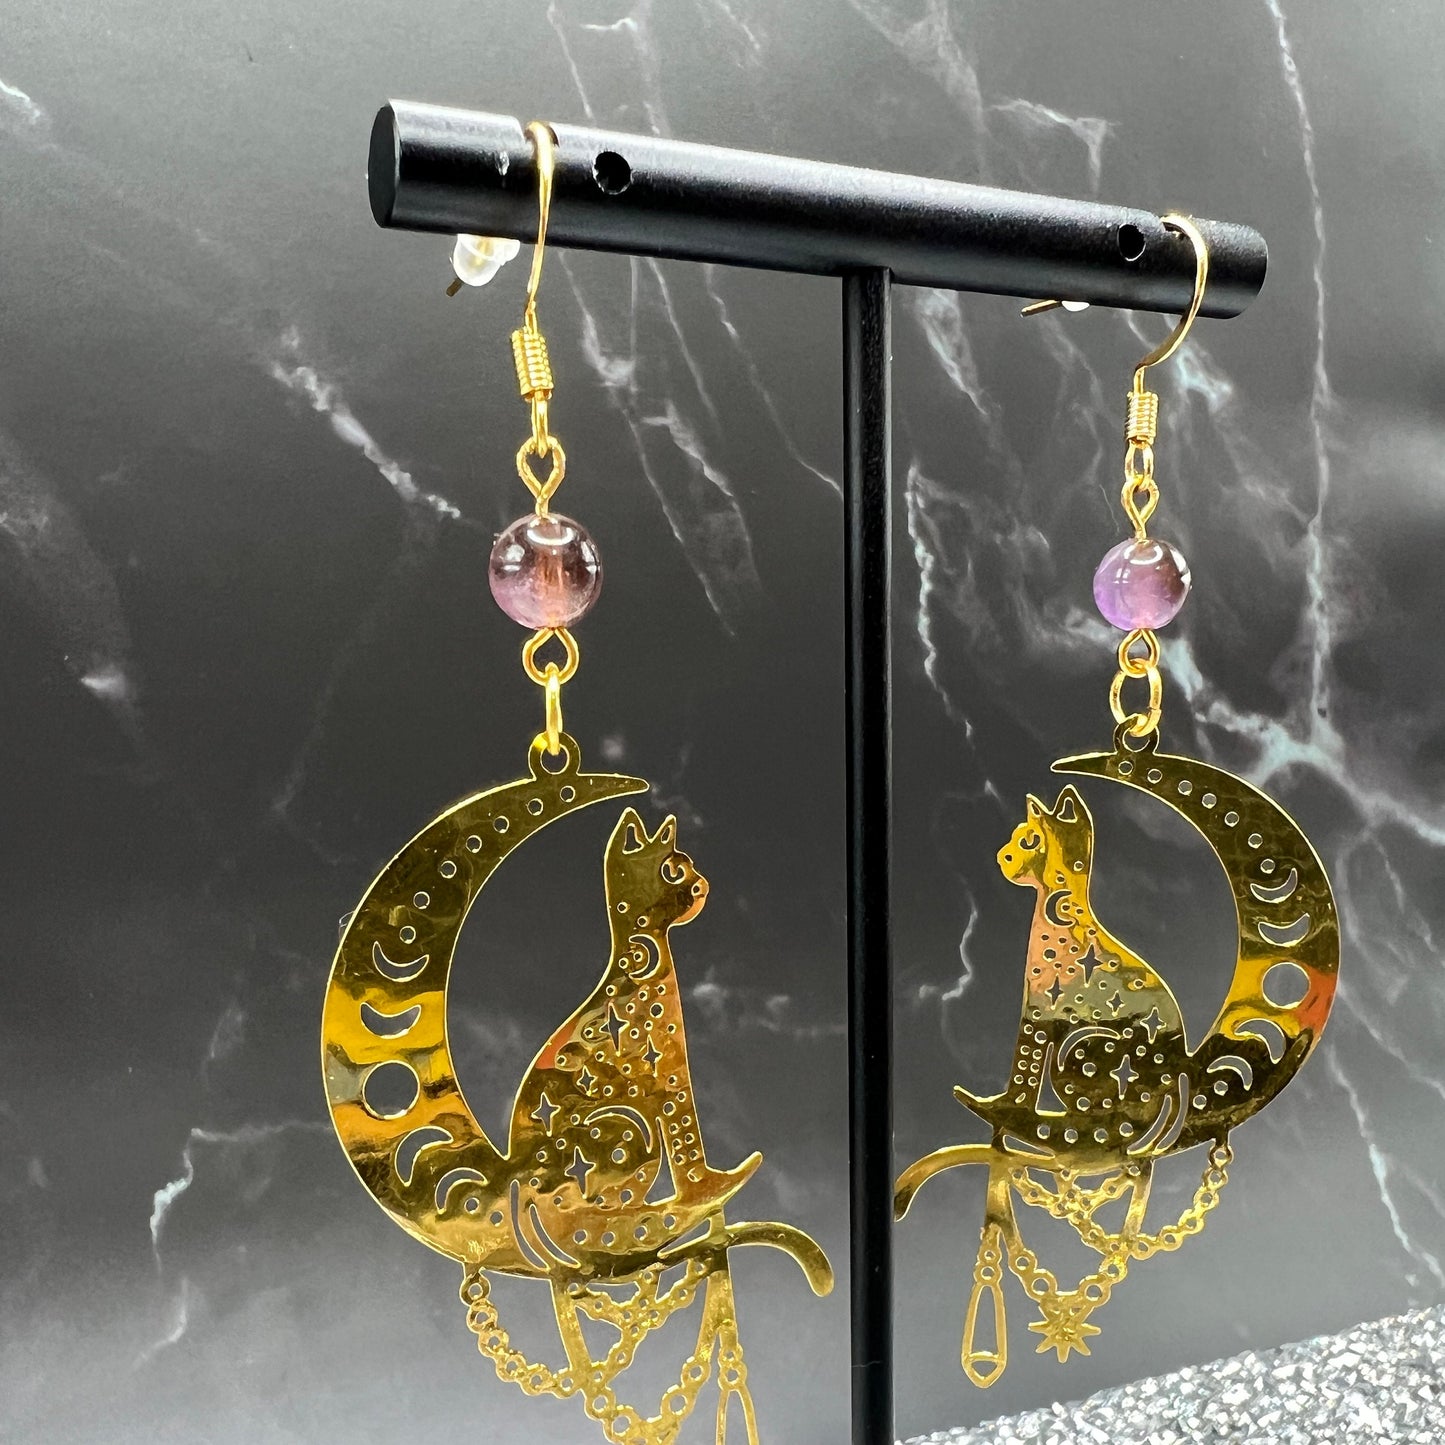 Close-up of Bohemian Beaded Cat Earrings featuring gold cat charms and purple crystal beads.